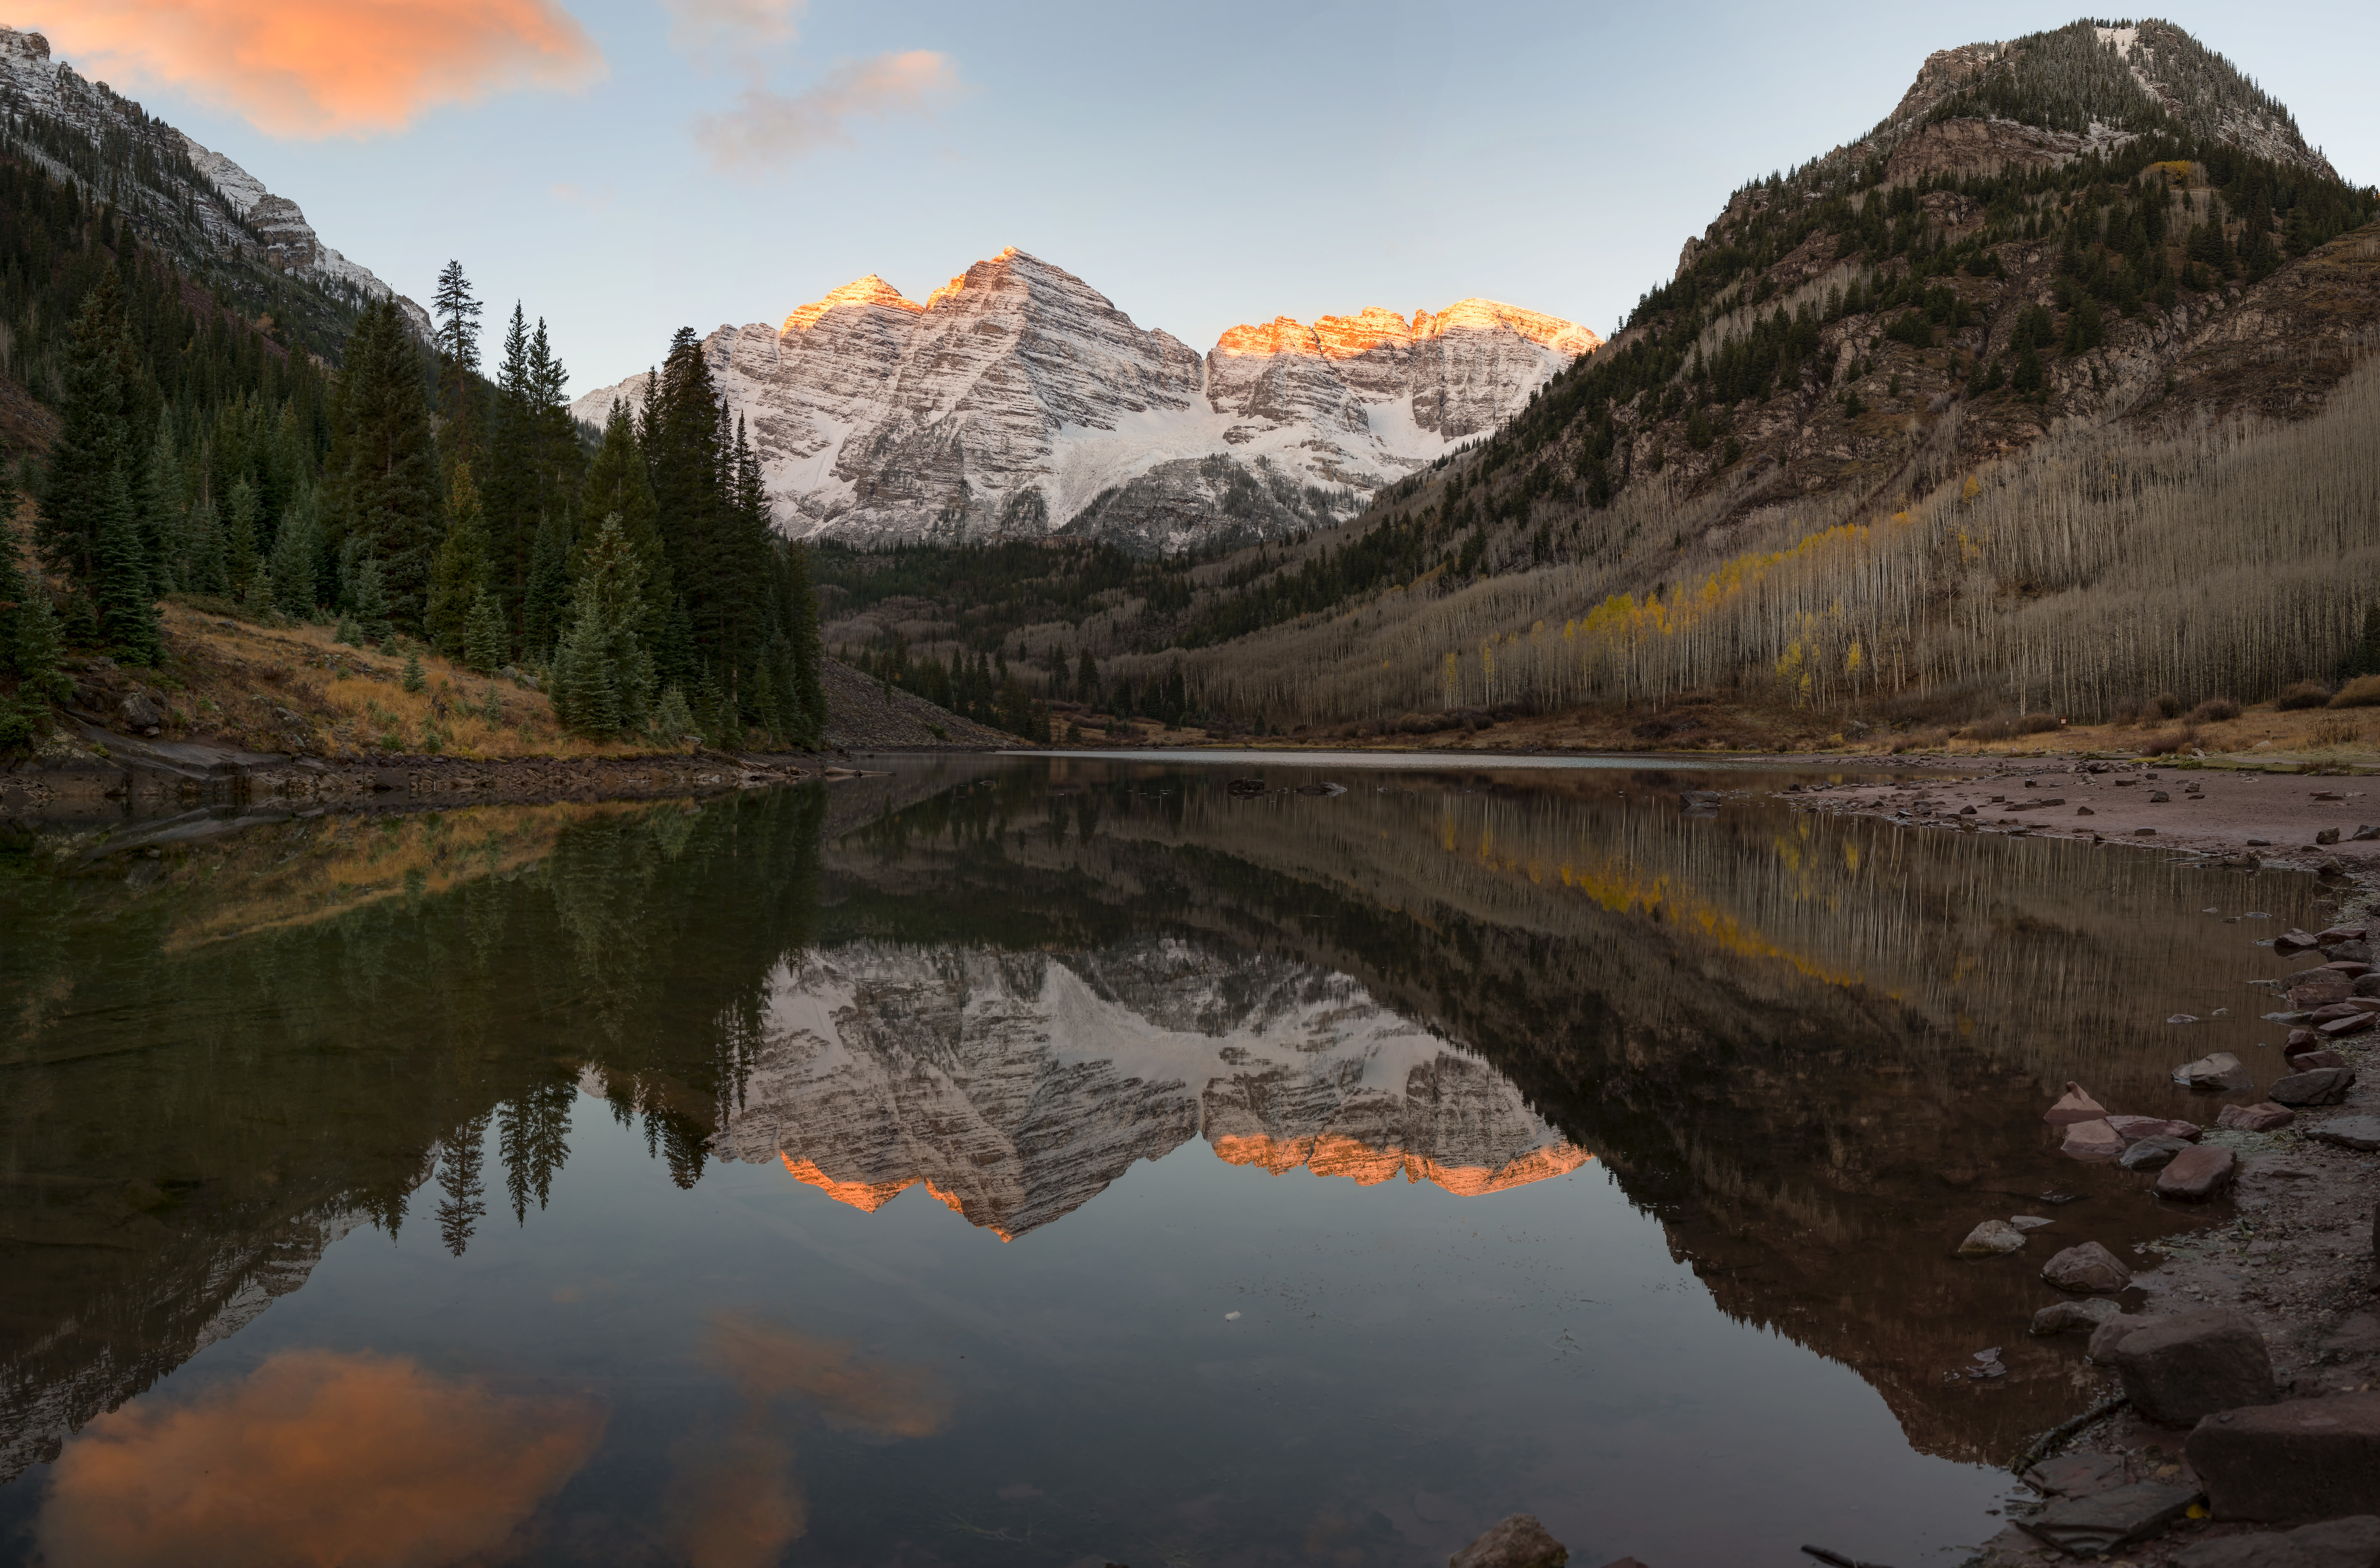 General 6143x4046 Pitkin Colorado landscape nature lake mountains reflection photography Maroon Bells sunrise water sky clouds trees rocks snow